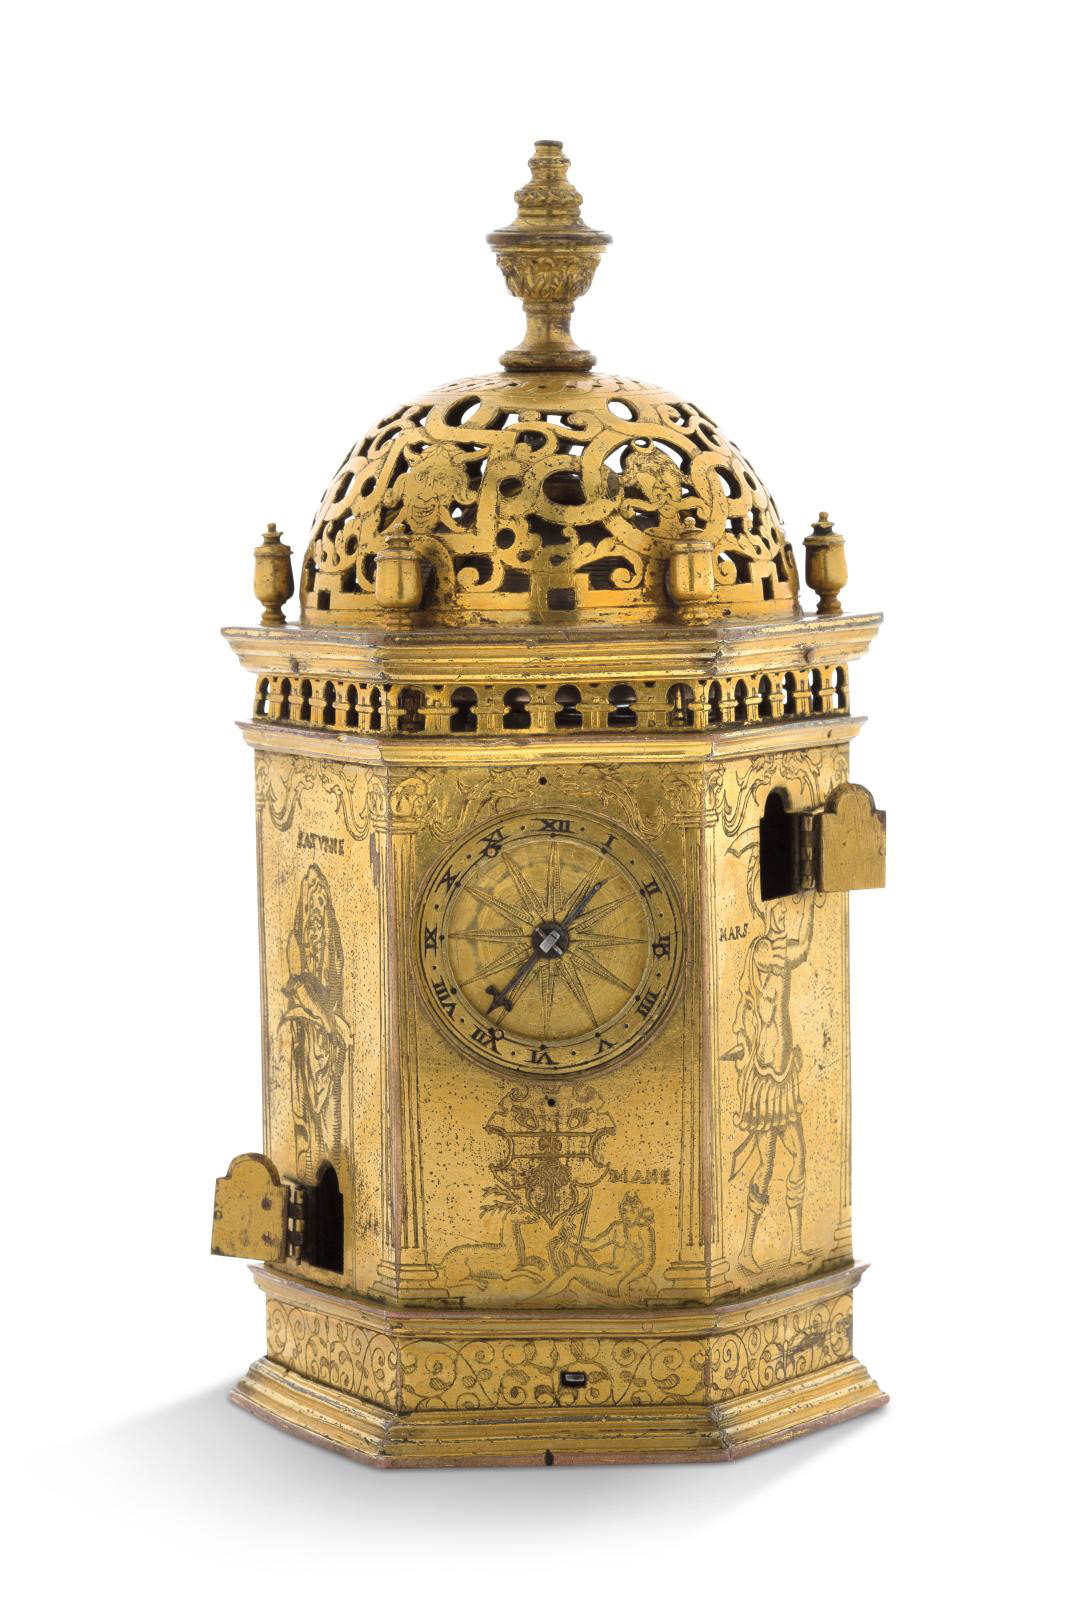 P. Plantard, Abbeville, mid-16th century, gilded copper table clock shaped like a hexagonal tower with the arms of Guillaume Bailly, Comte